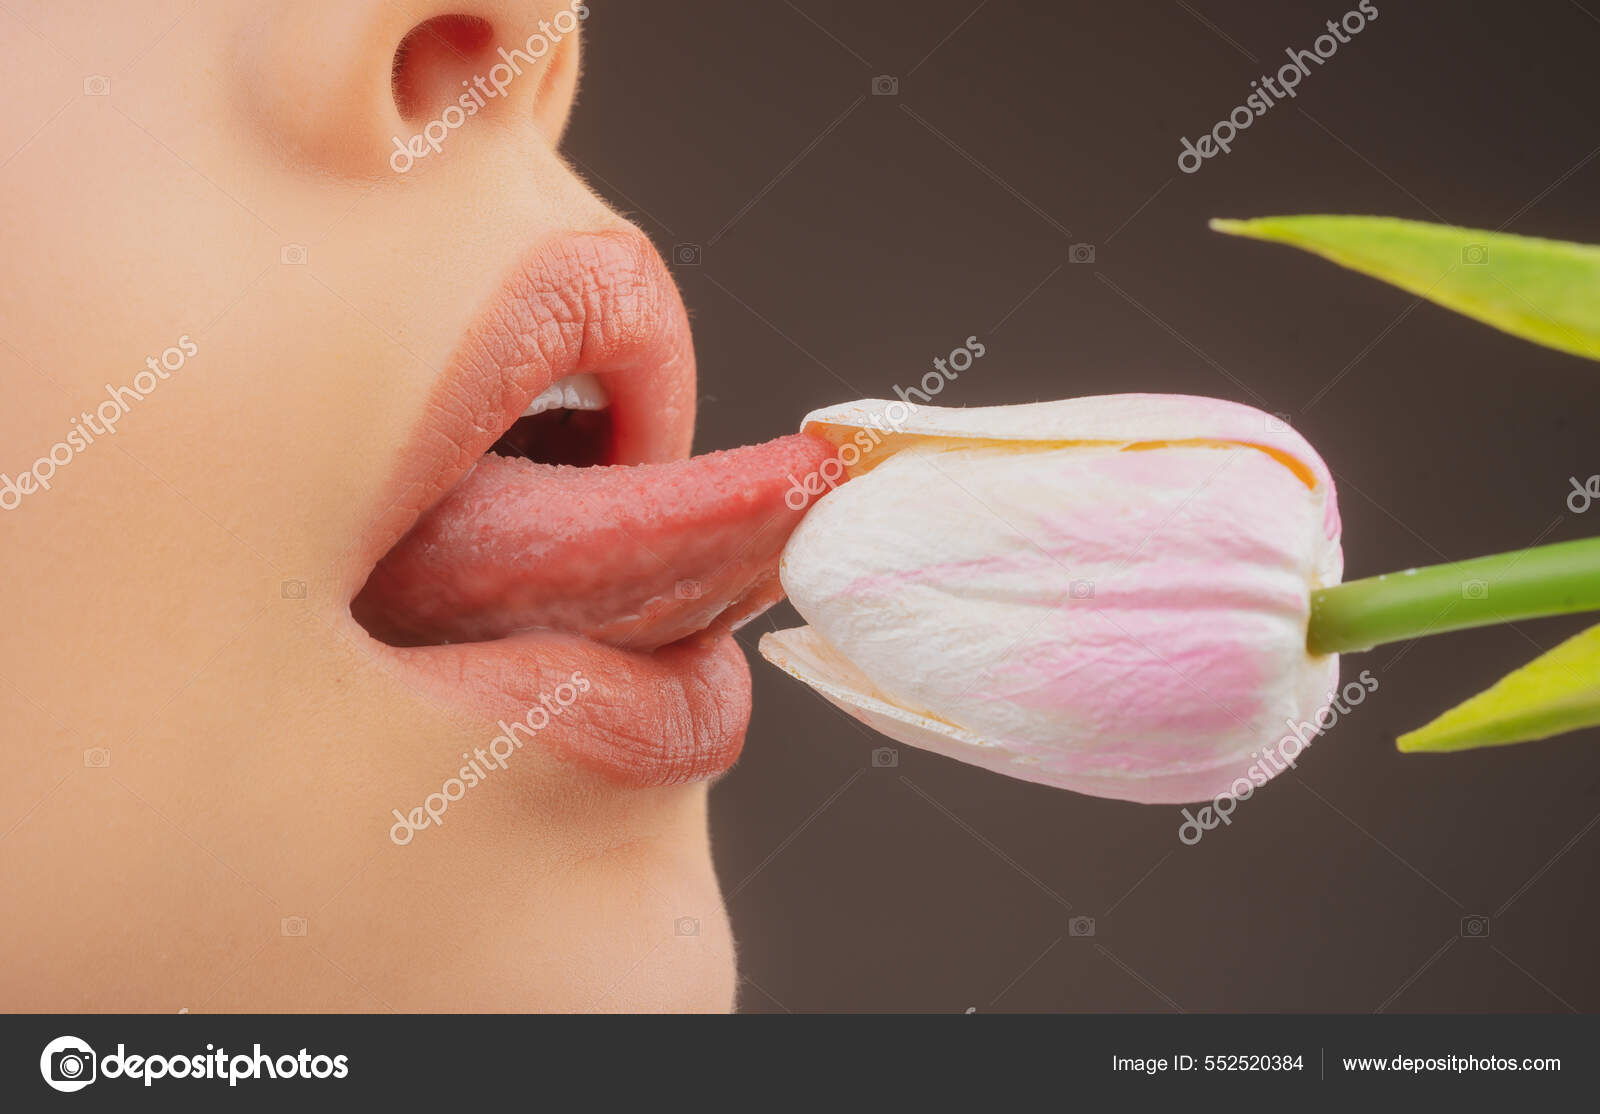 Lips and spring flower. Sexy woman mouth and flowers. Oral sex, orgasm, blowjob, licking flower pic